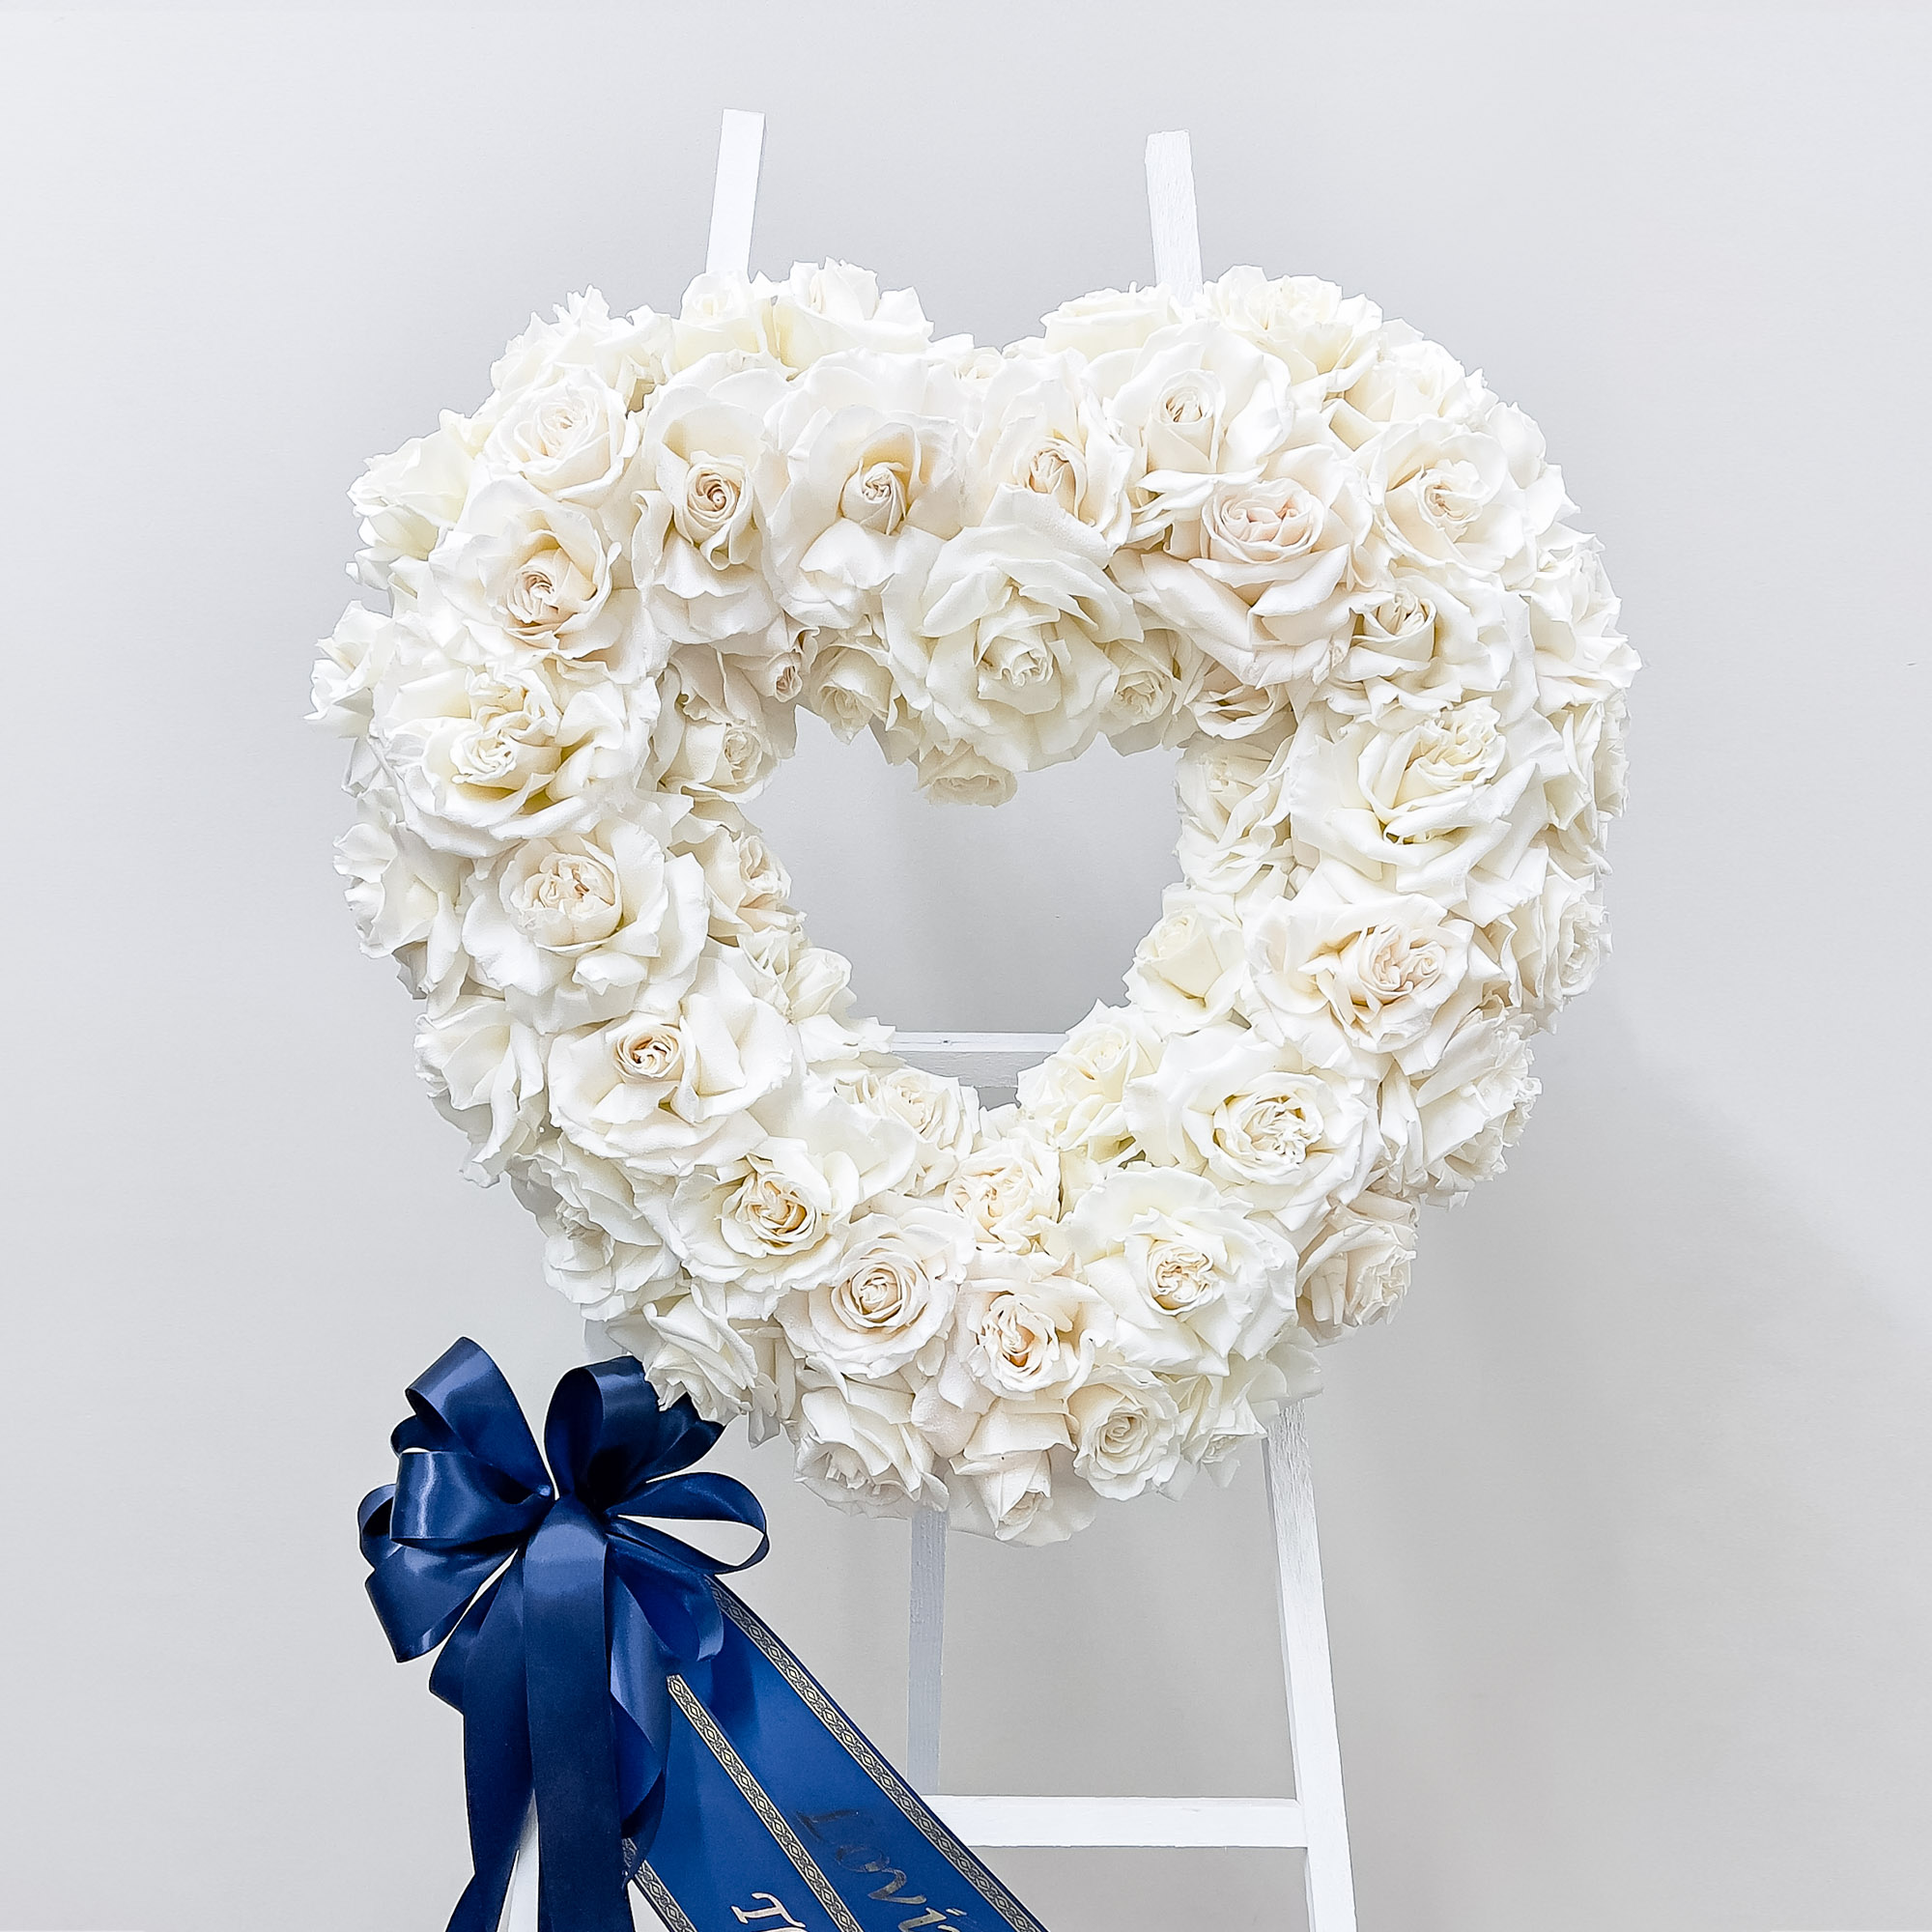 All The Bright Colors Heart Shaped Tribute Wreath